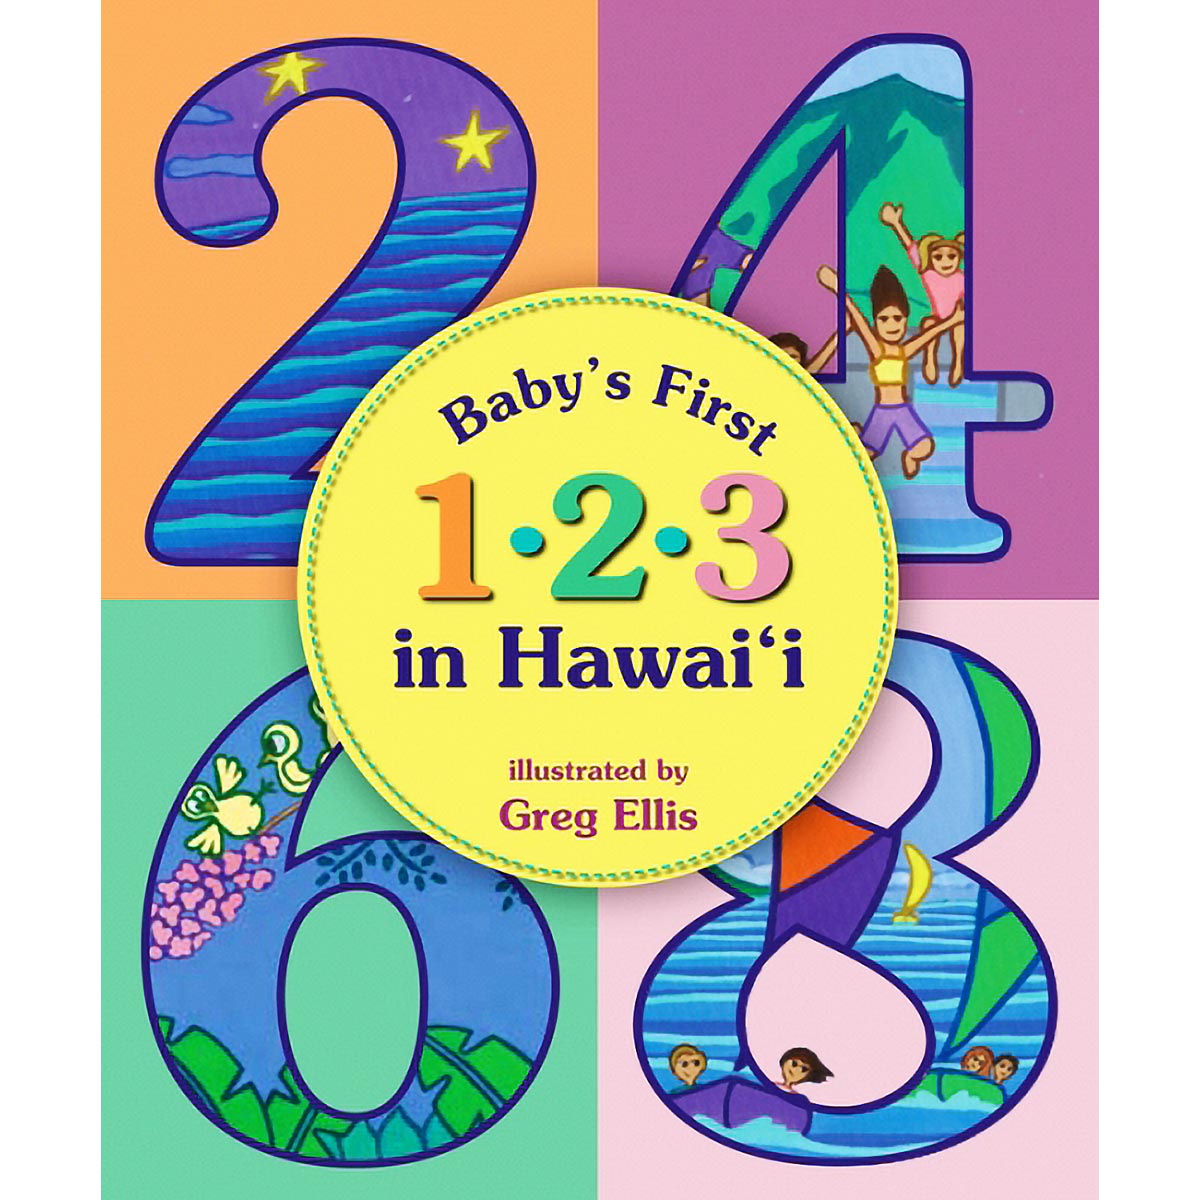 Baby's First 1-2-3 in Hawai‘i